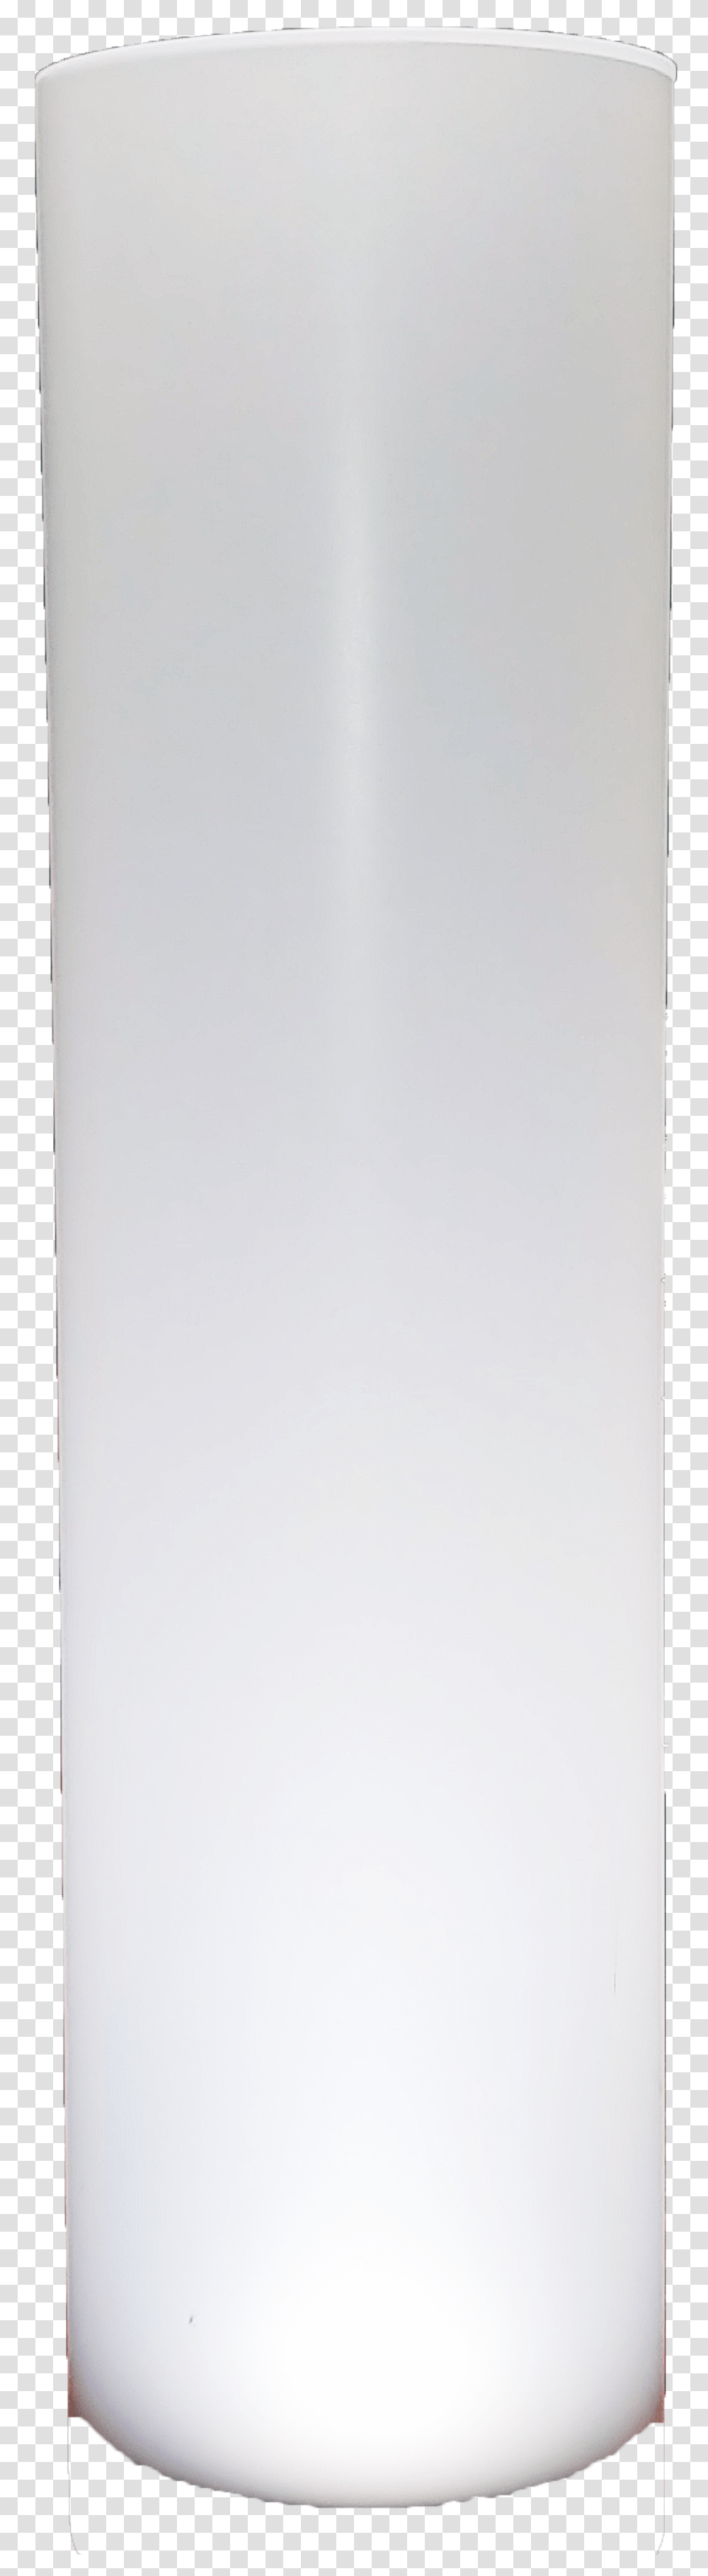 Lampshade, Appliance, White Board, Dishwasher Transparent Png